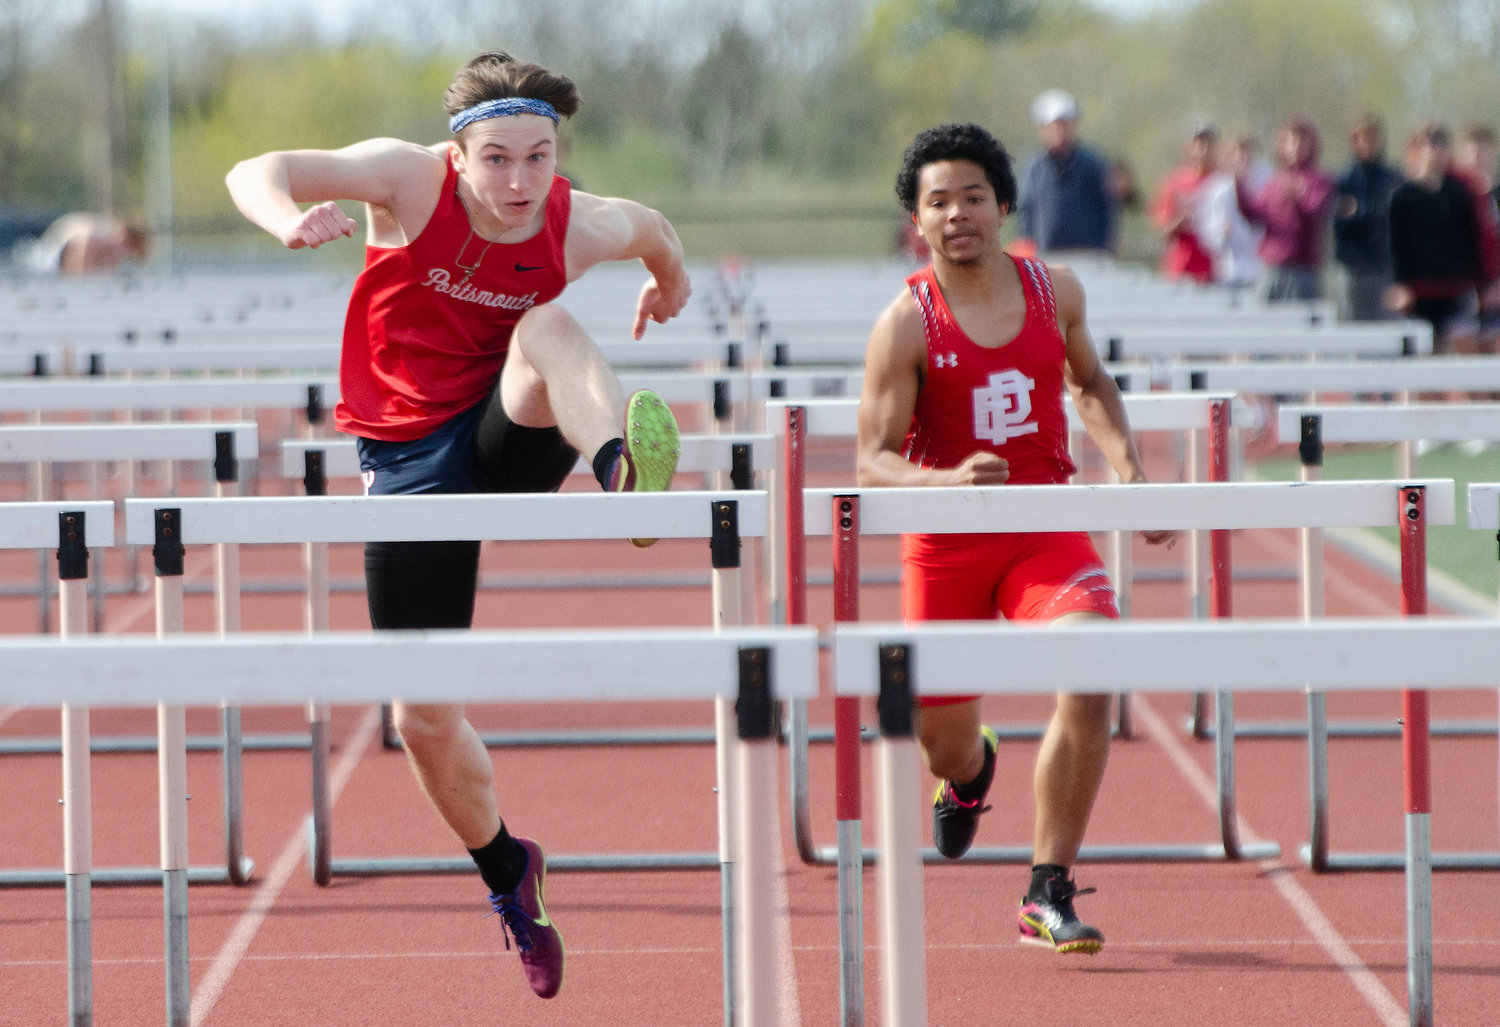 Maciej Tabak of PHS (left) and Denzy Suazo of East Providence race in the 110 -meter hurdles, won by Tabak in a time of 18.5 seconds.